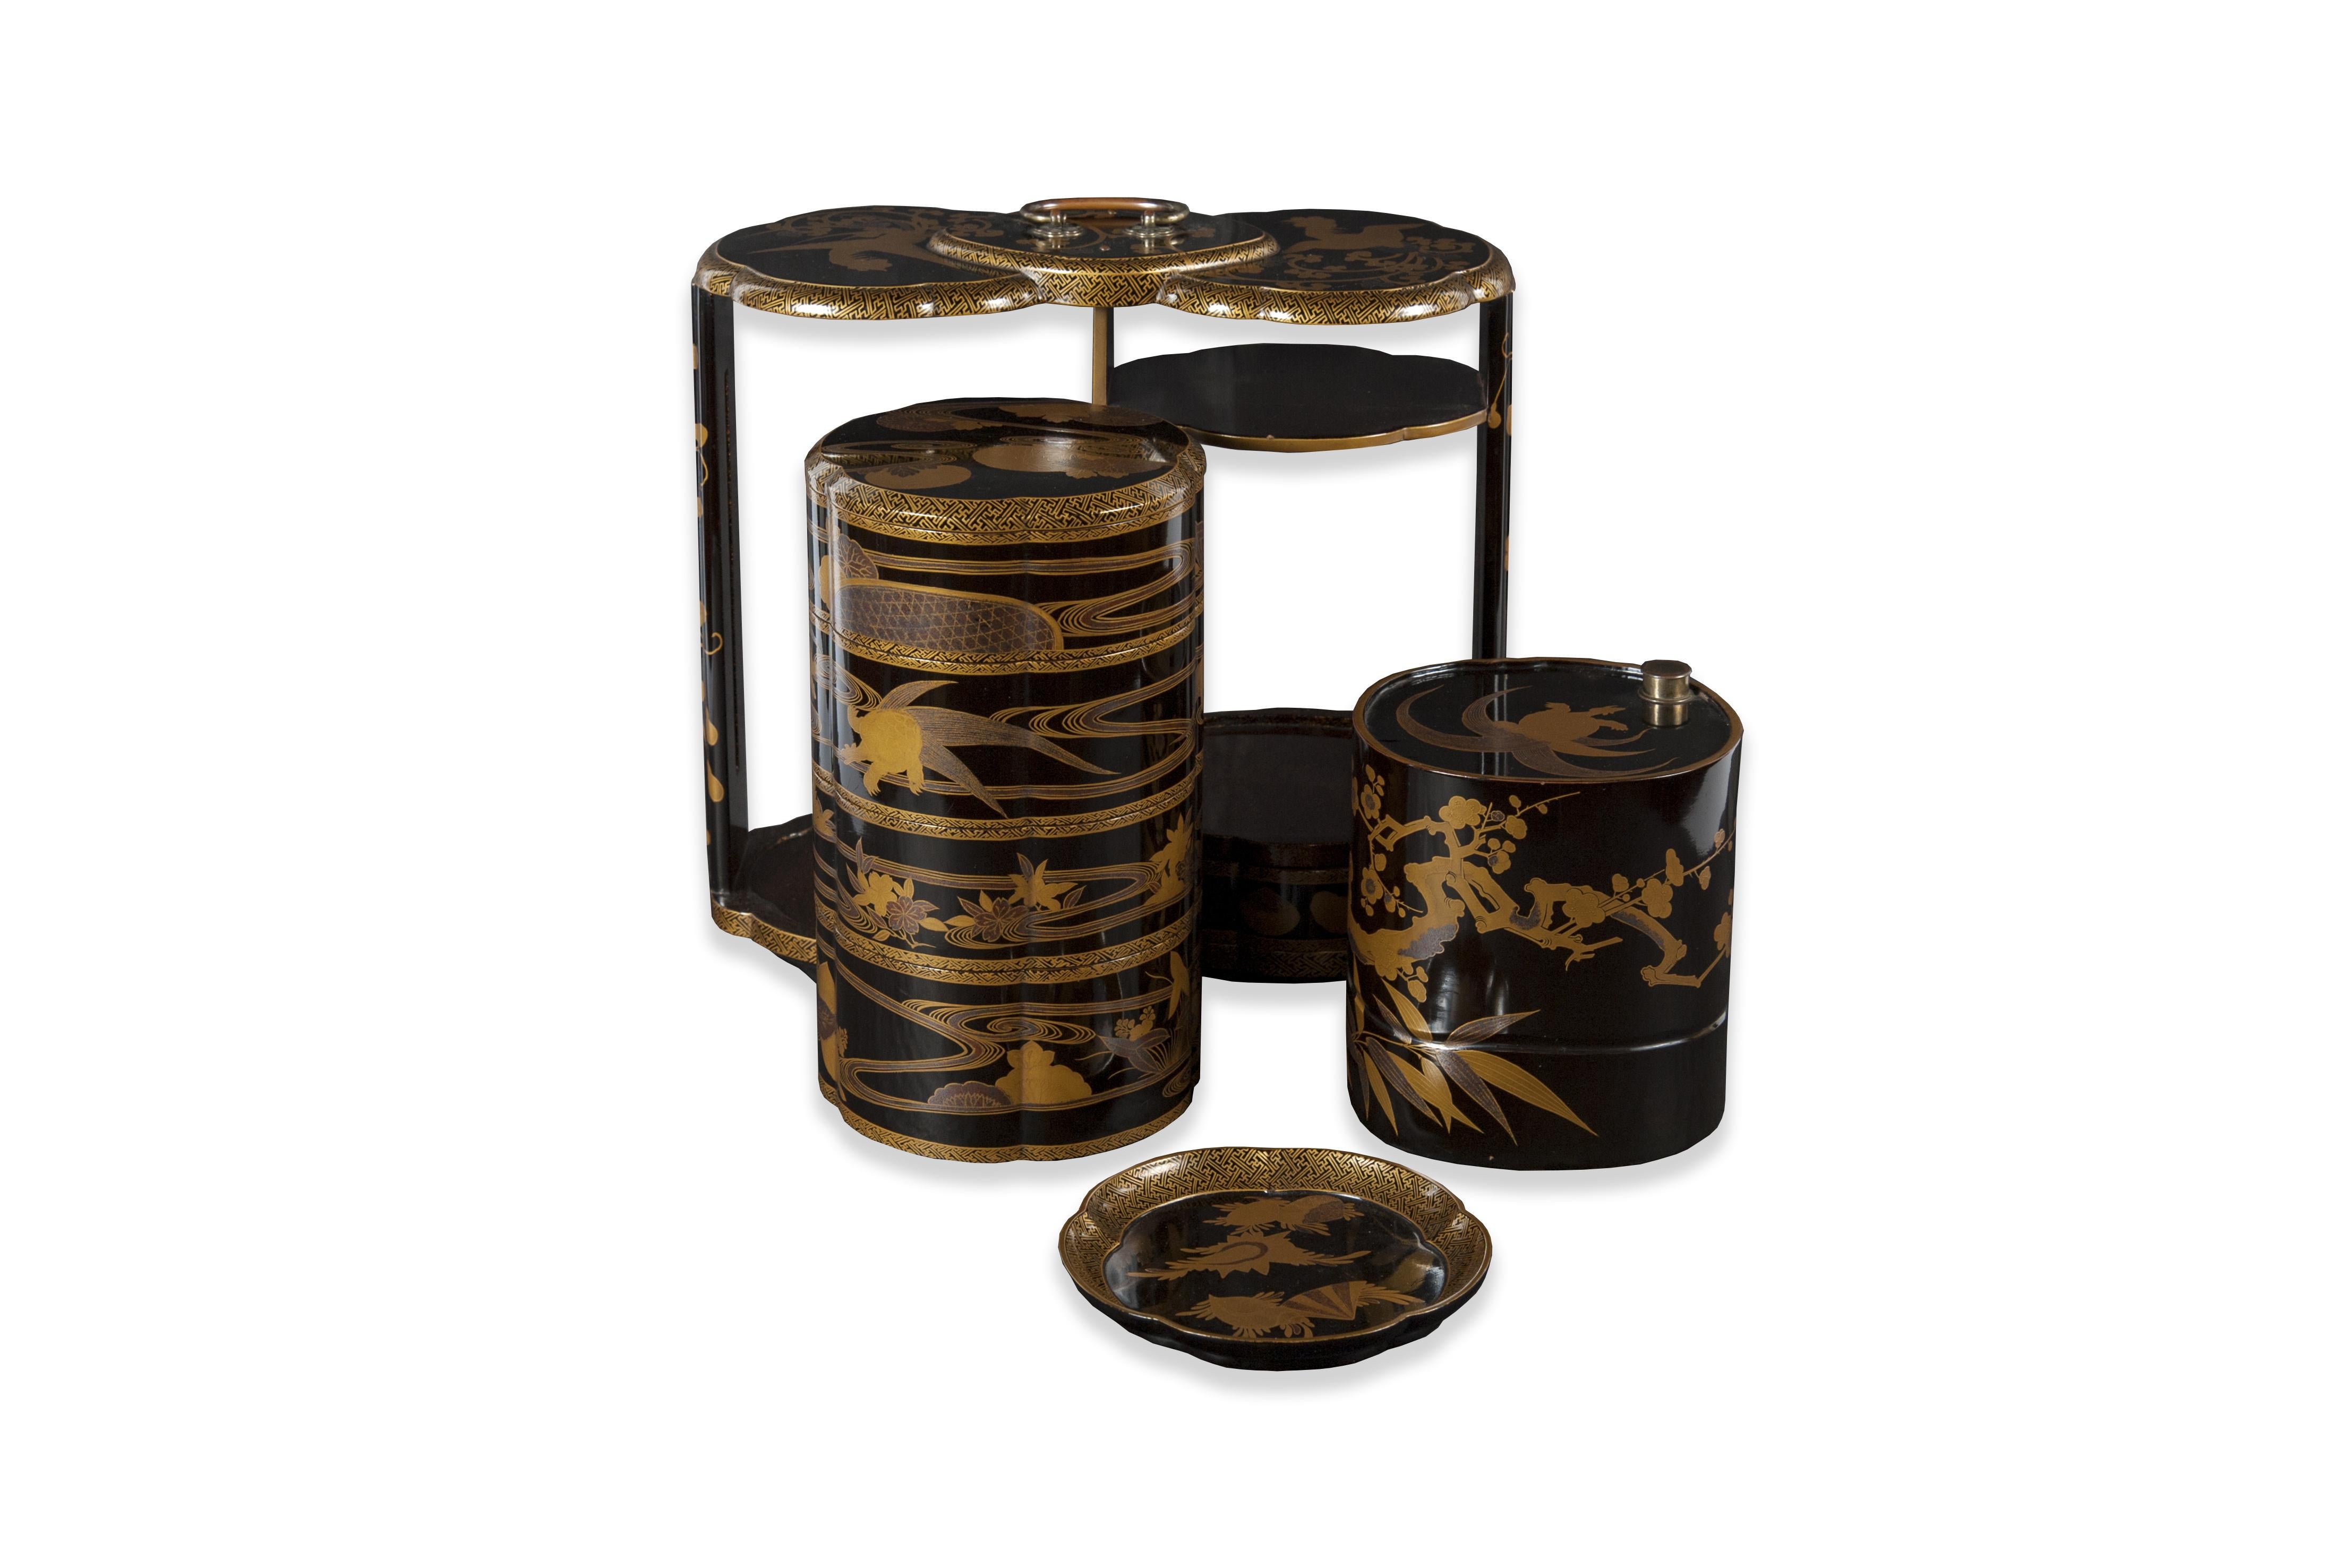 Lacquered Fine Japanese Black and Gold Lacquer Sageju-Bako - Picnic Box For Sale